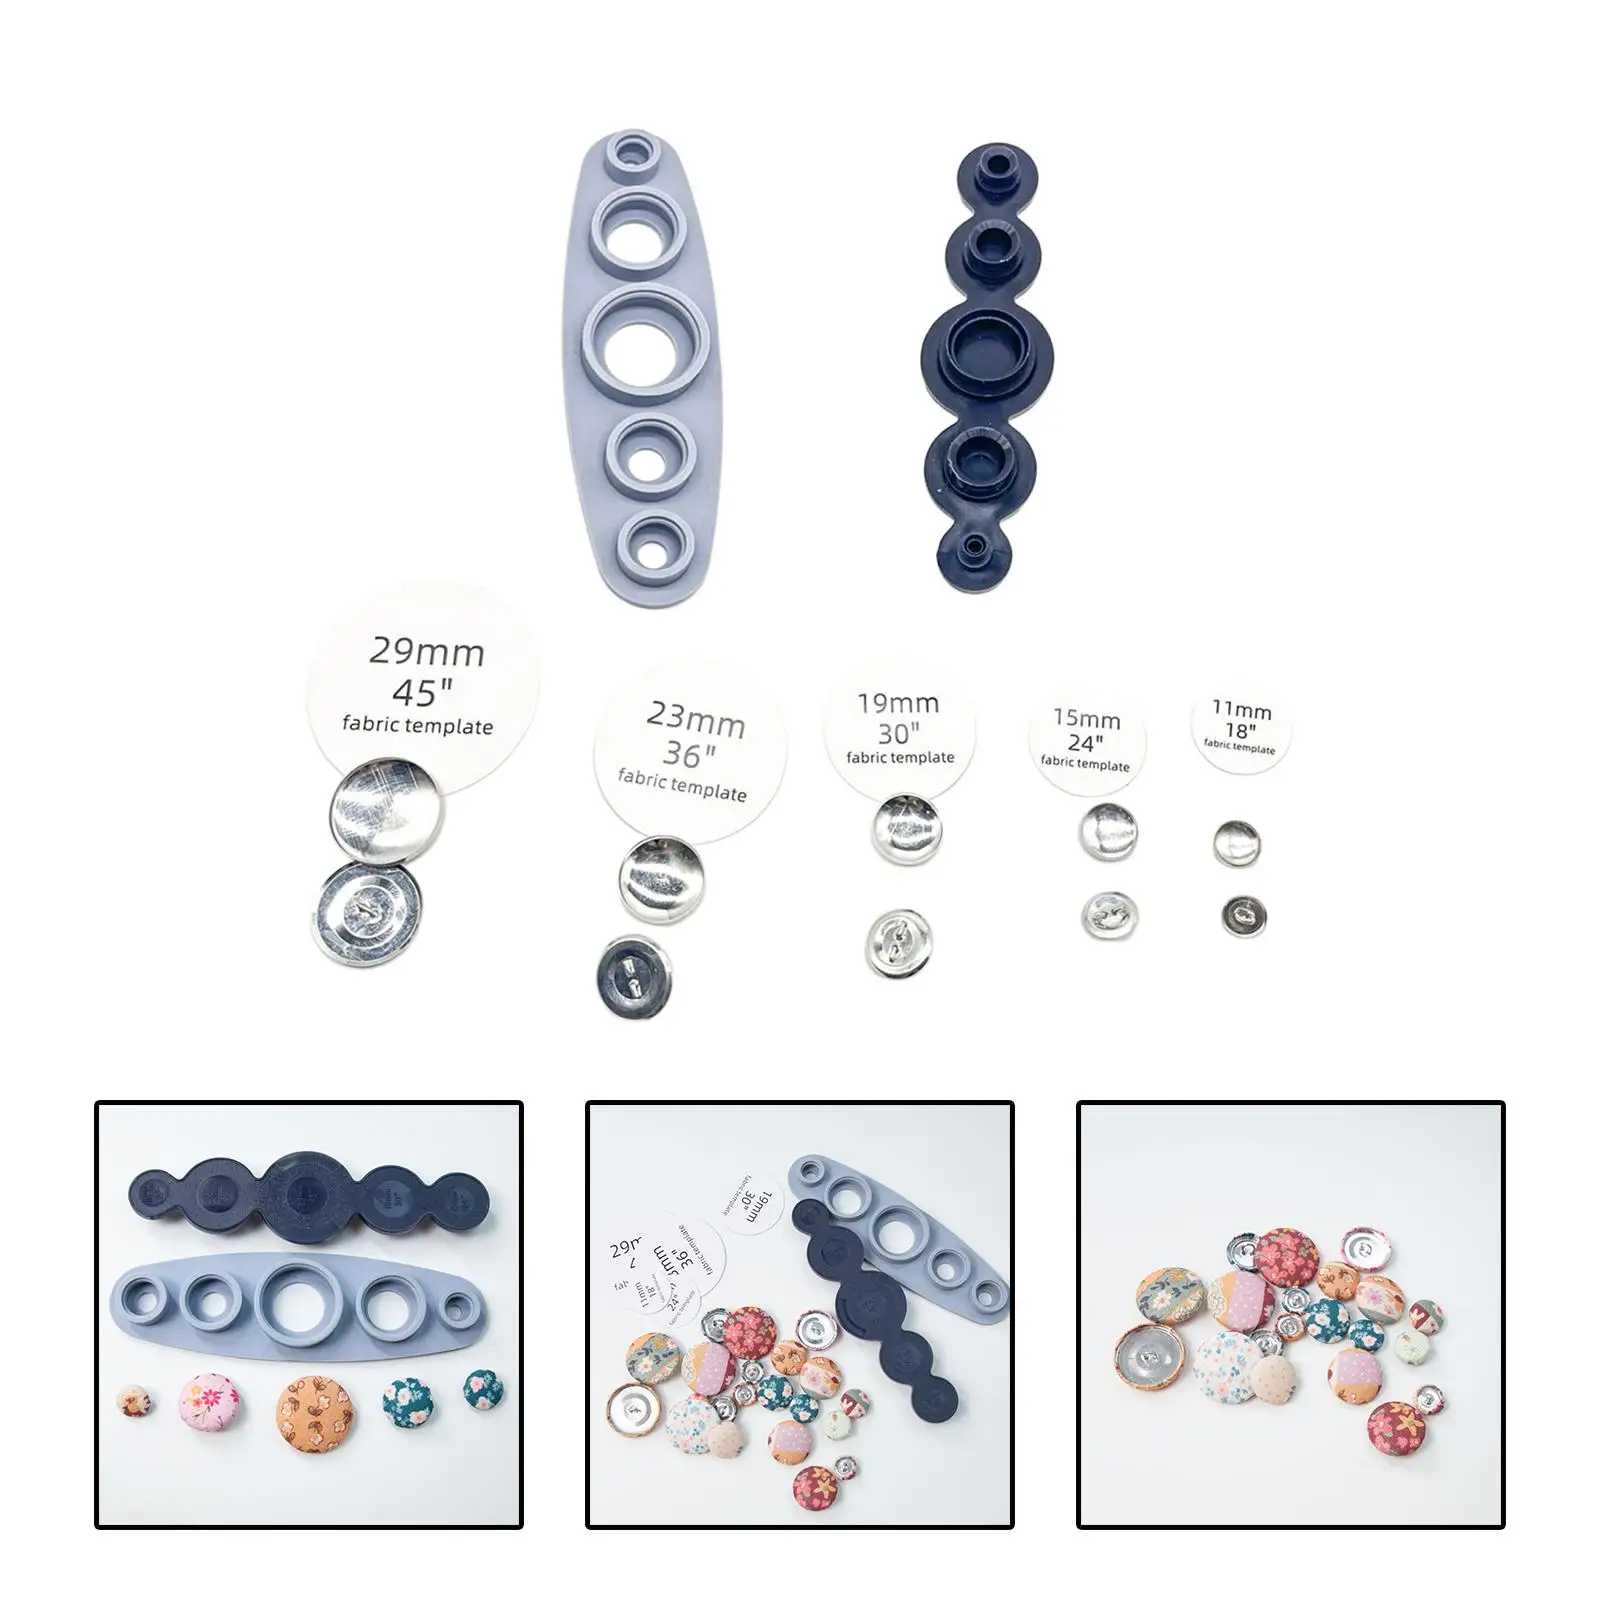 Tool for Cover Buttons Fabric Covered Buttons Jeans 11mm, 15mm, 19mm, 23mm, 29mm DIY Button Craft Set Button Maker Machine